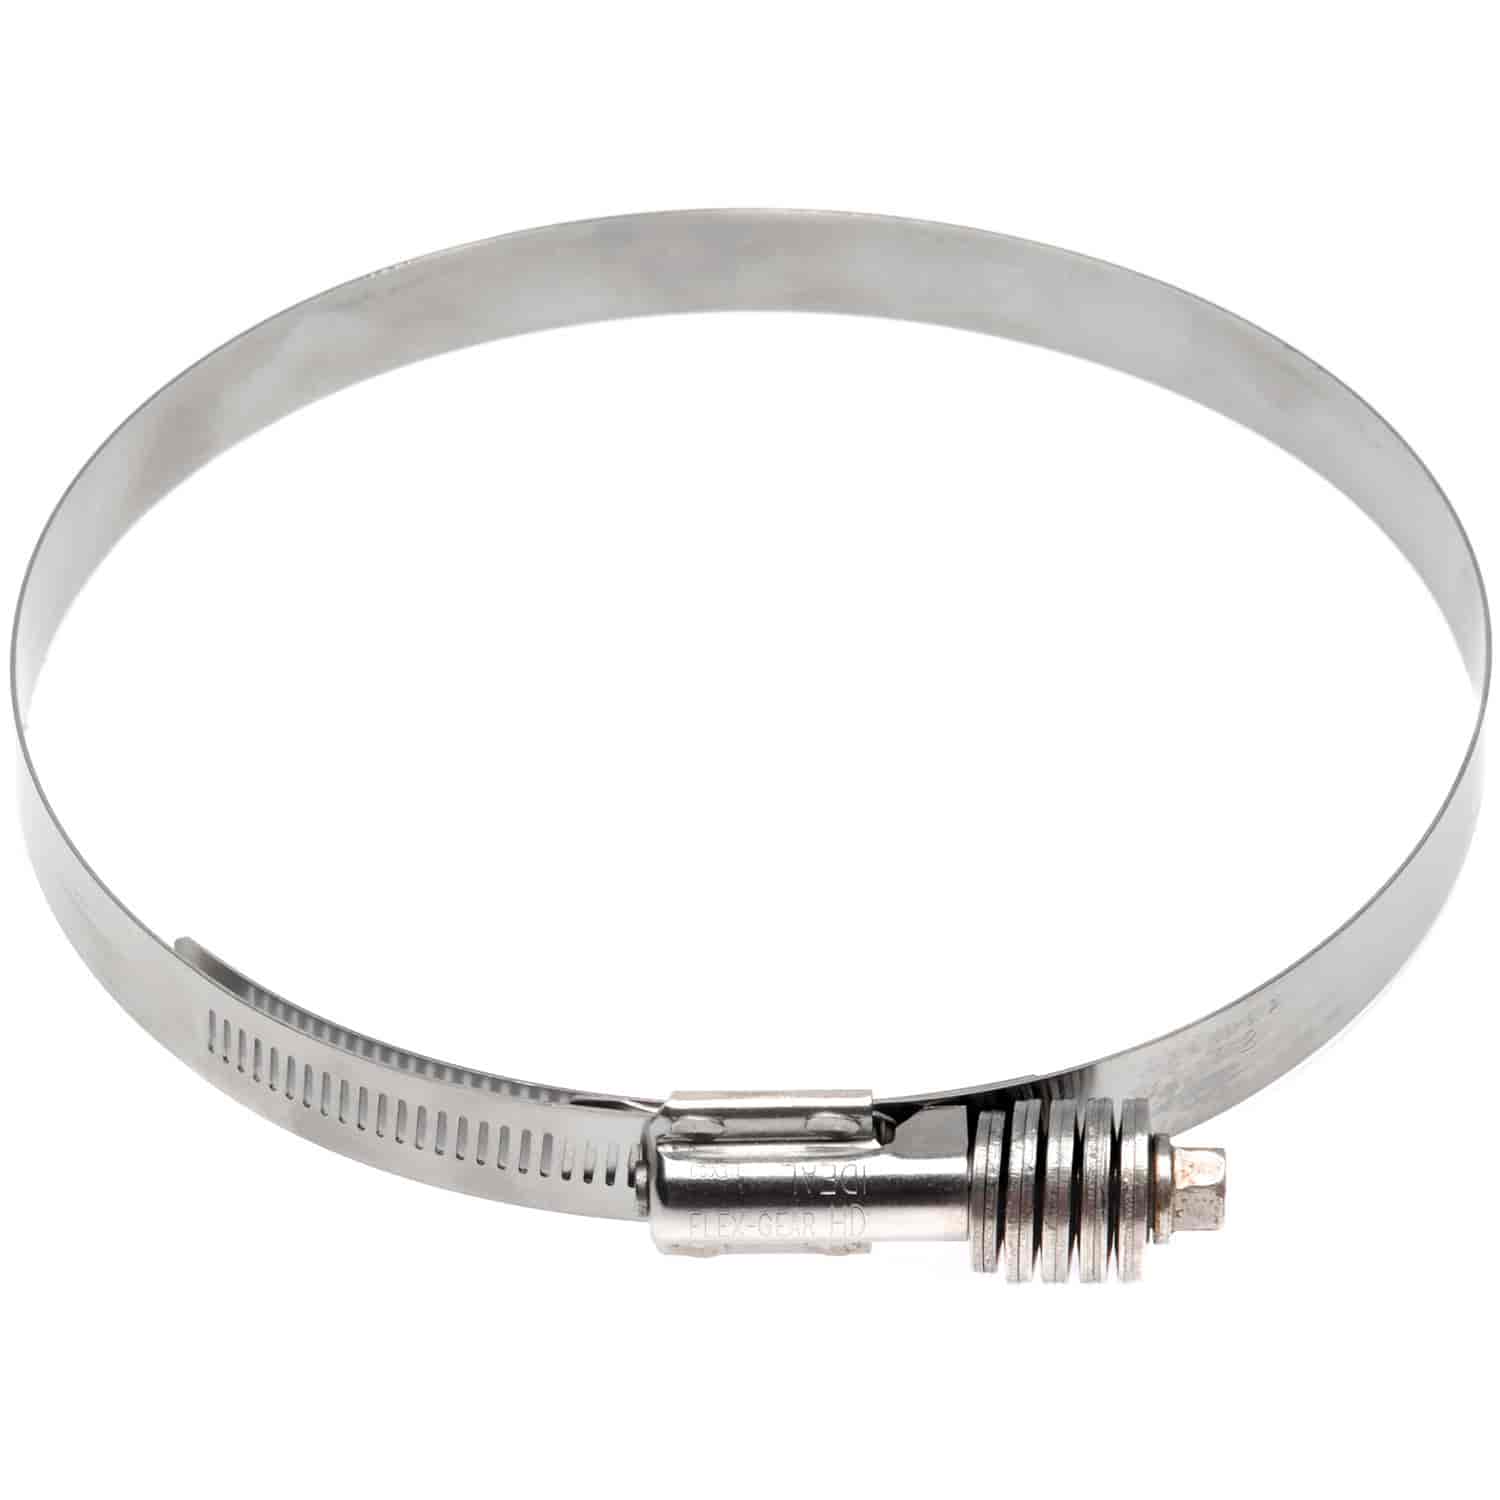 Stainless Steel Marine Hose Clamp [4.125 in. to 3.25 in. Outside Diameter]